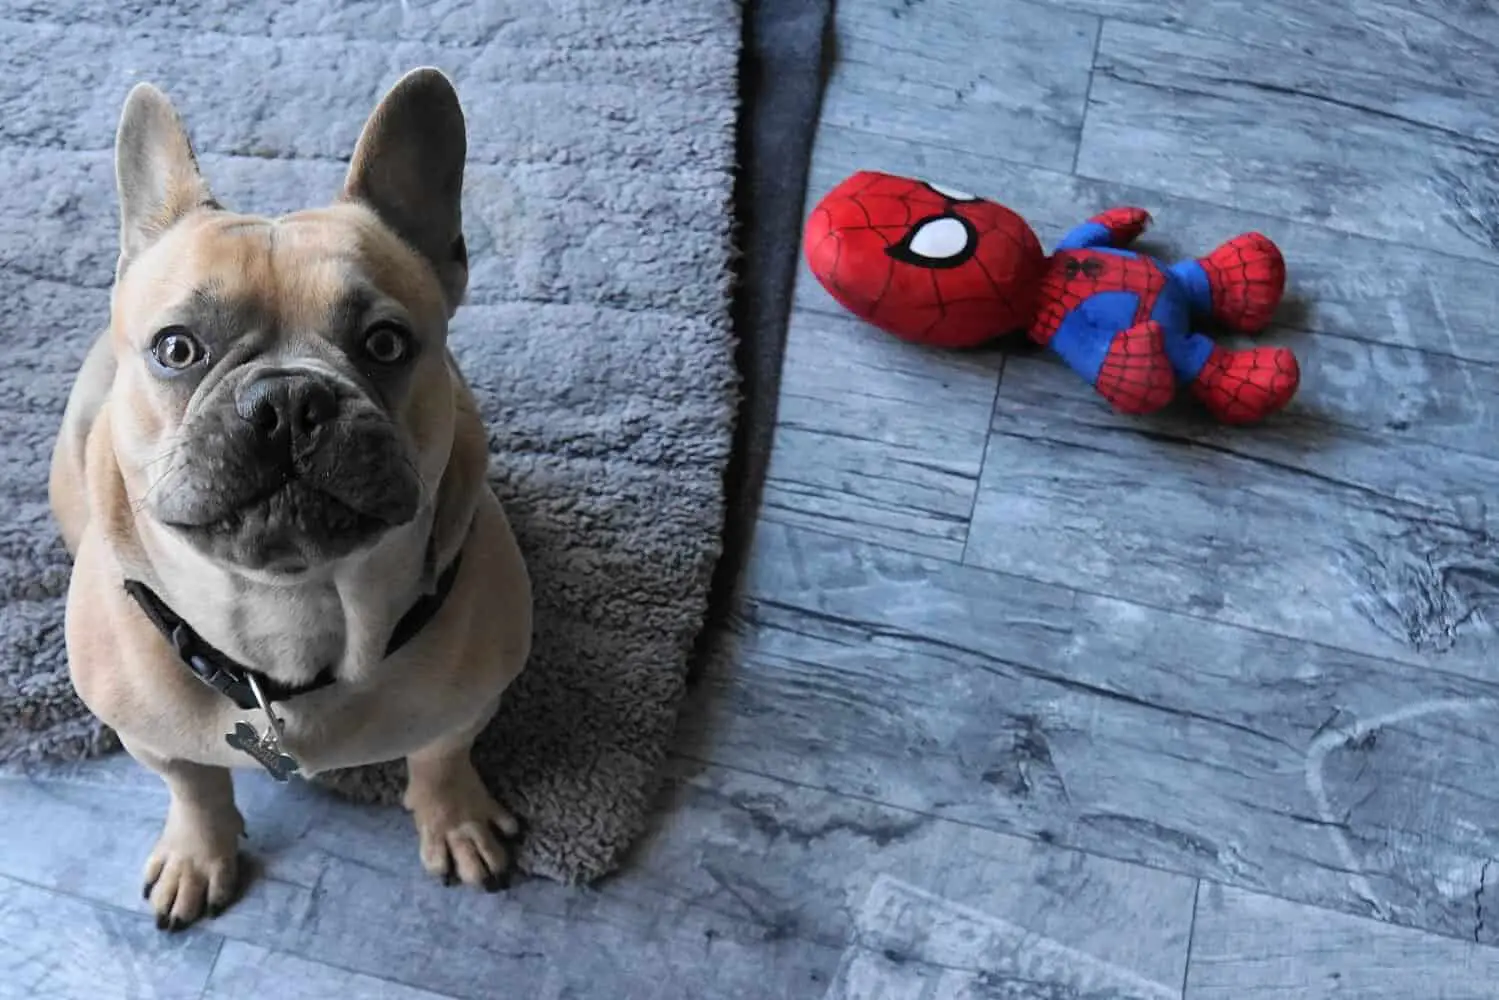 best toys for french bulldogs